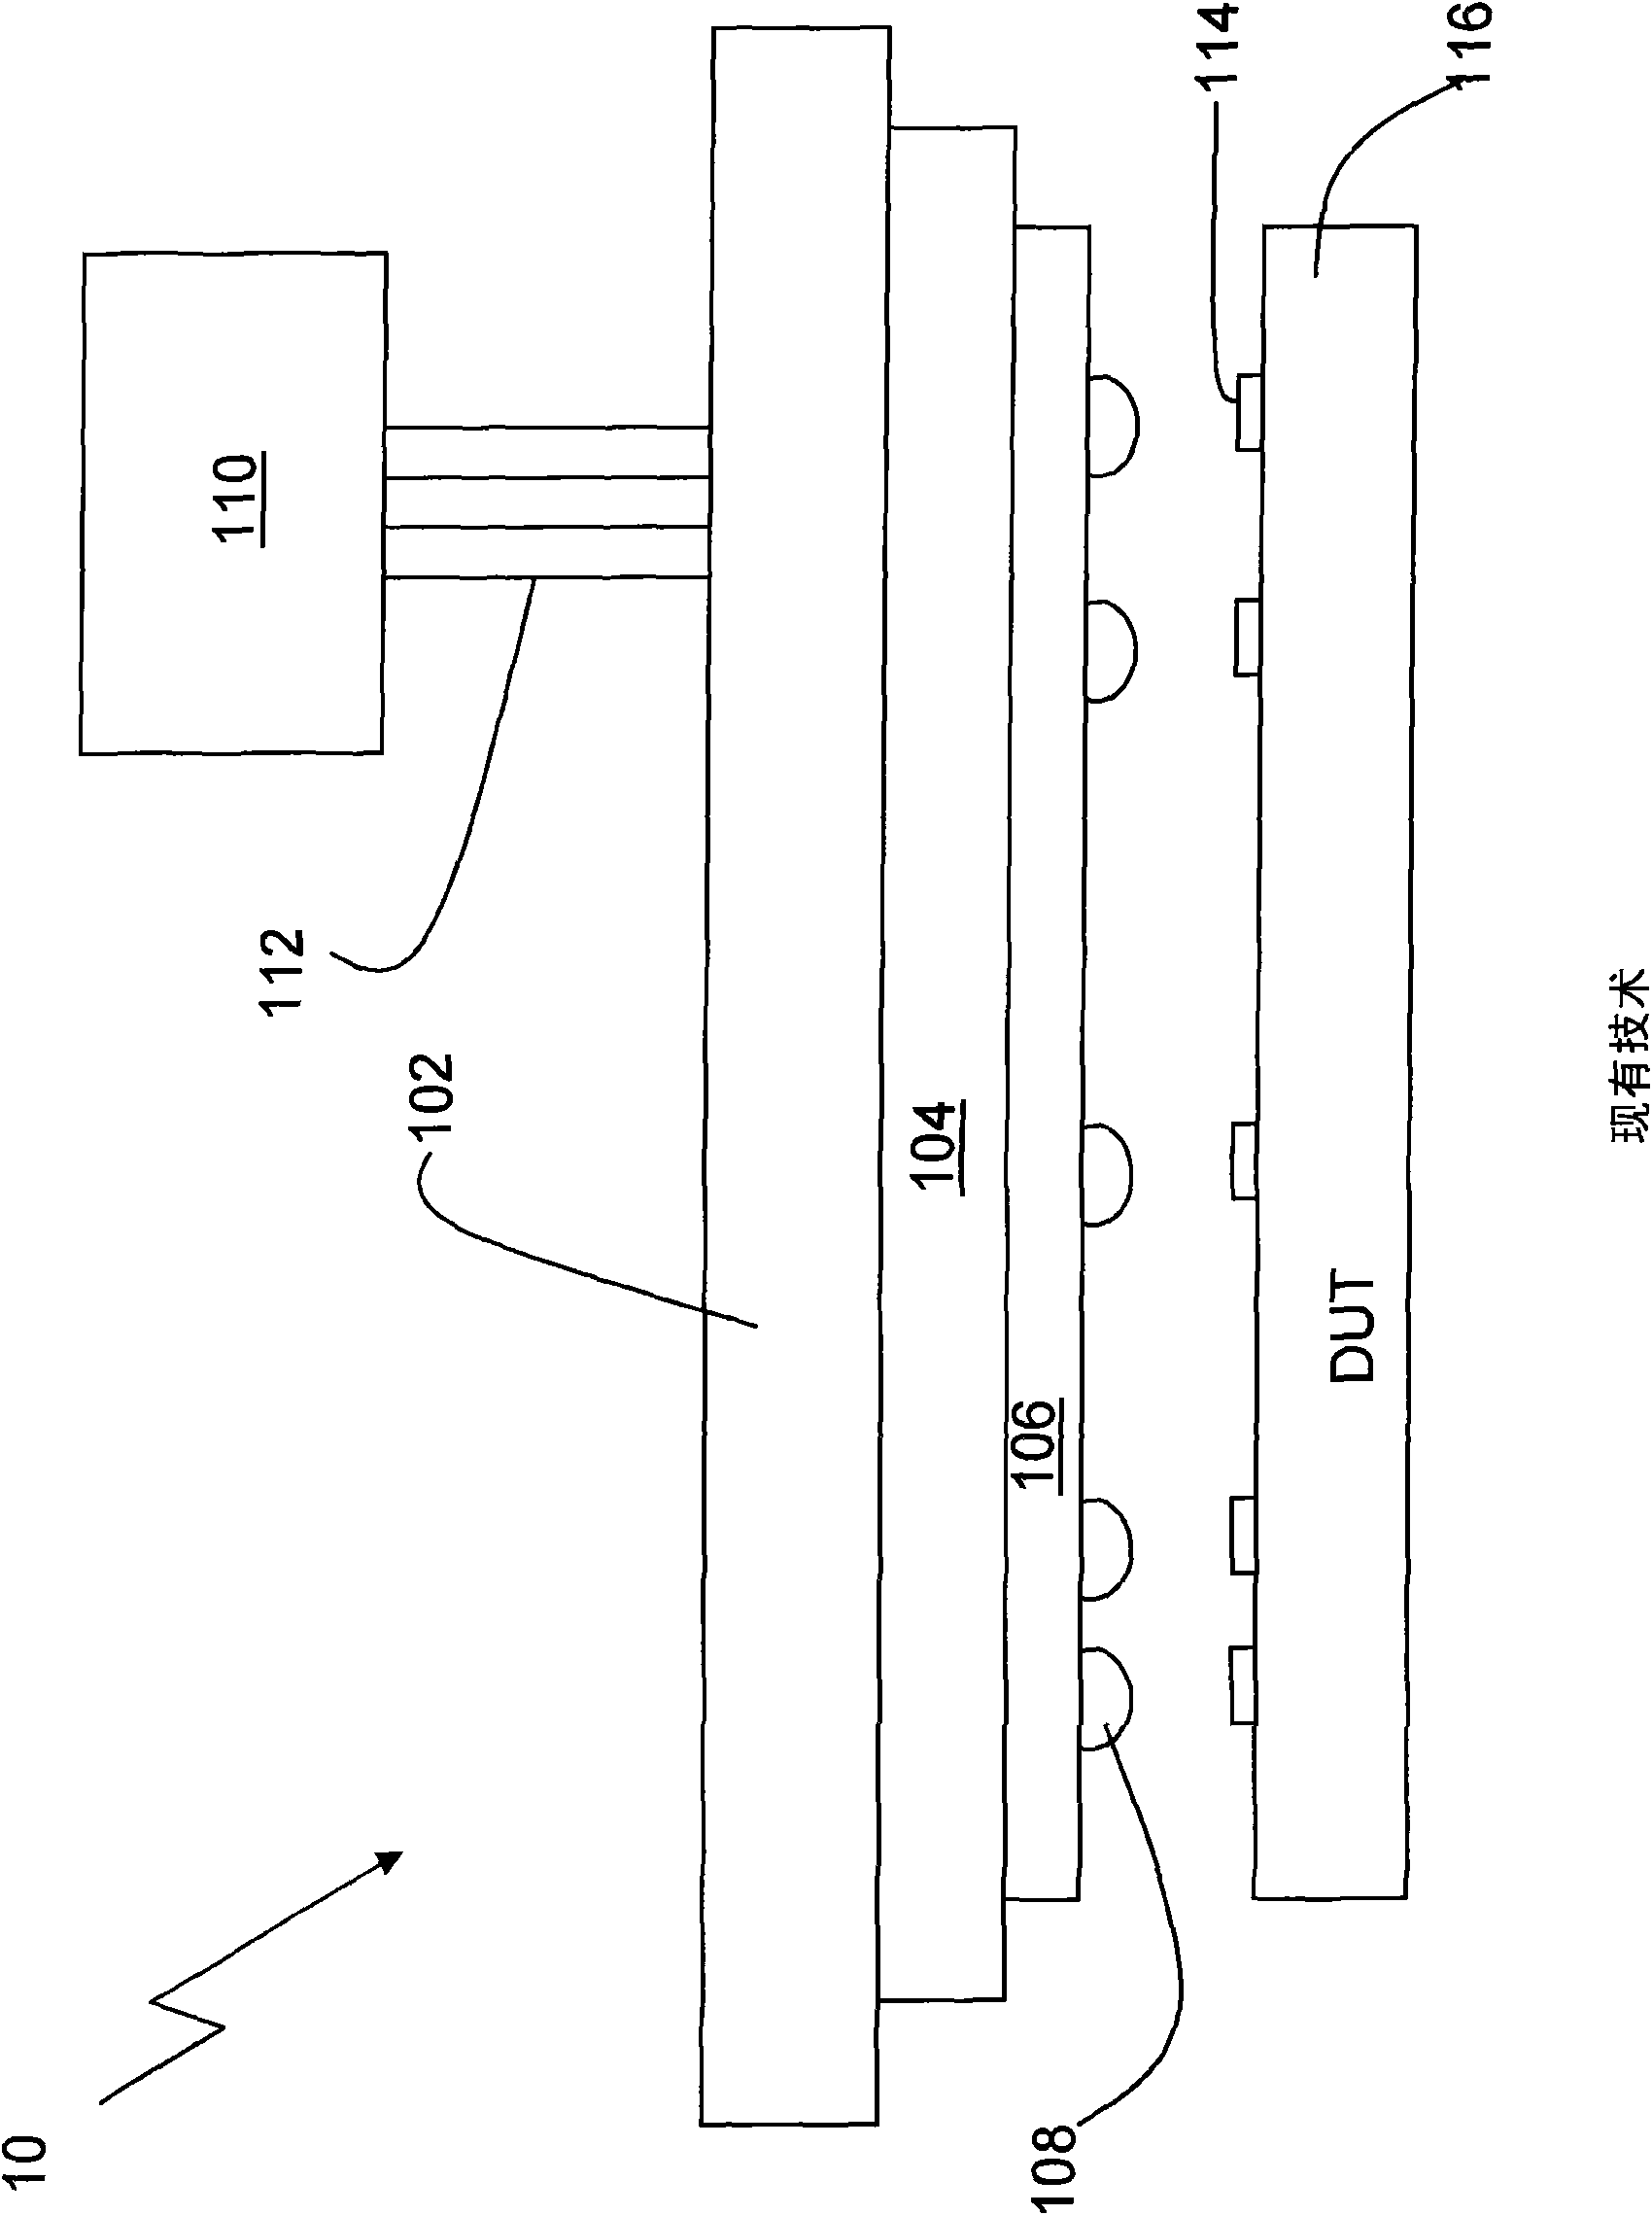 Testing of electronic circuits using an active probe integrated circuit